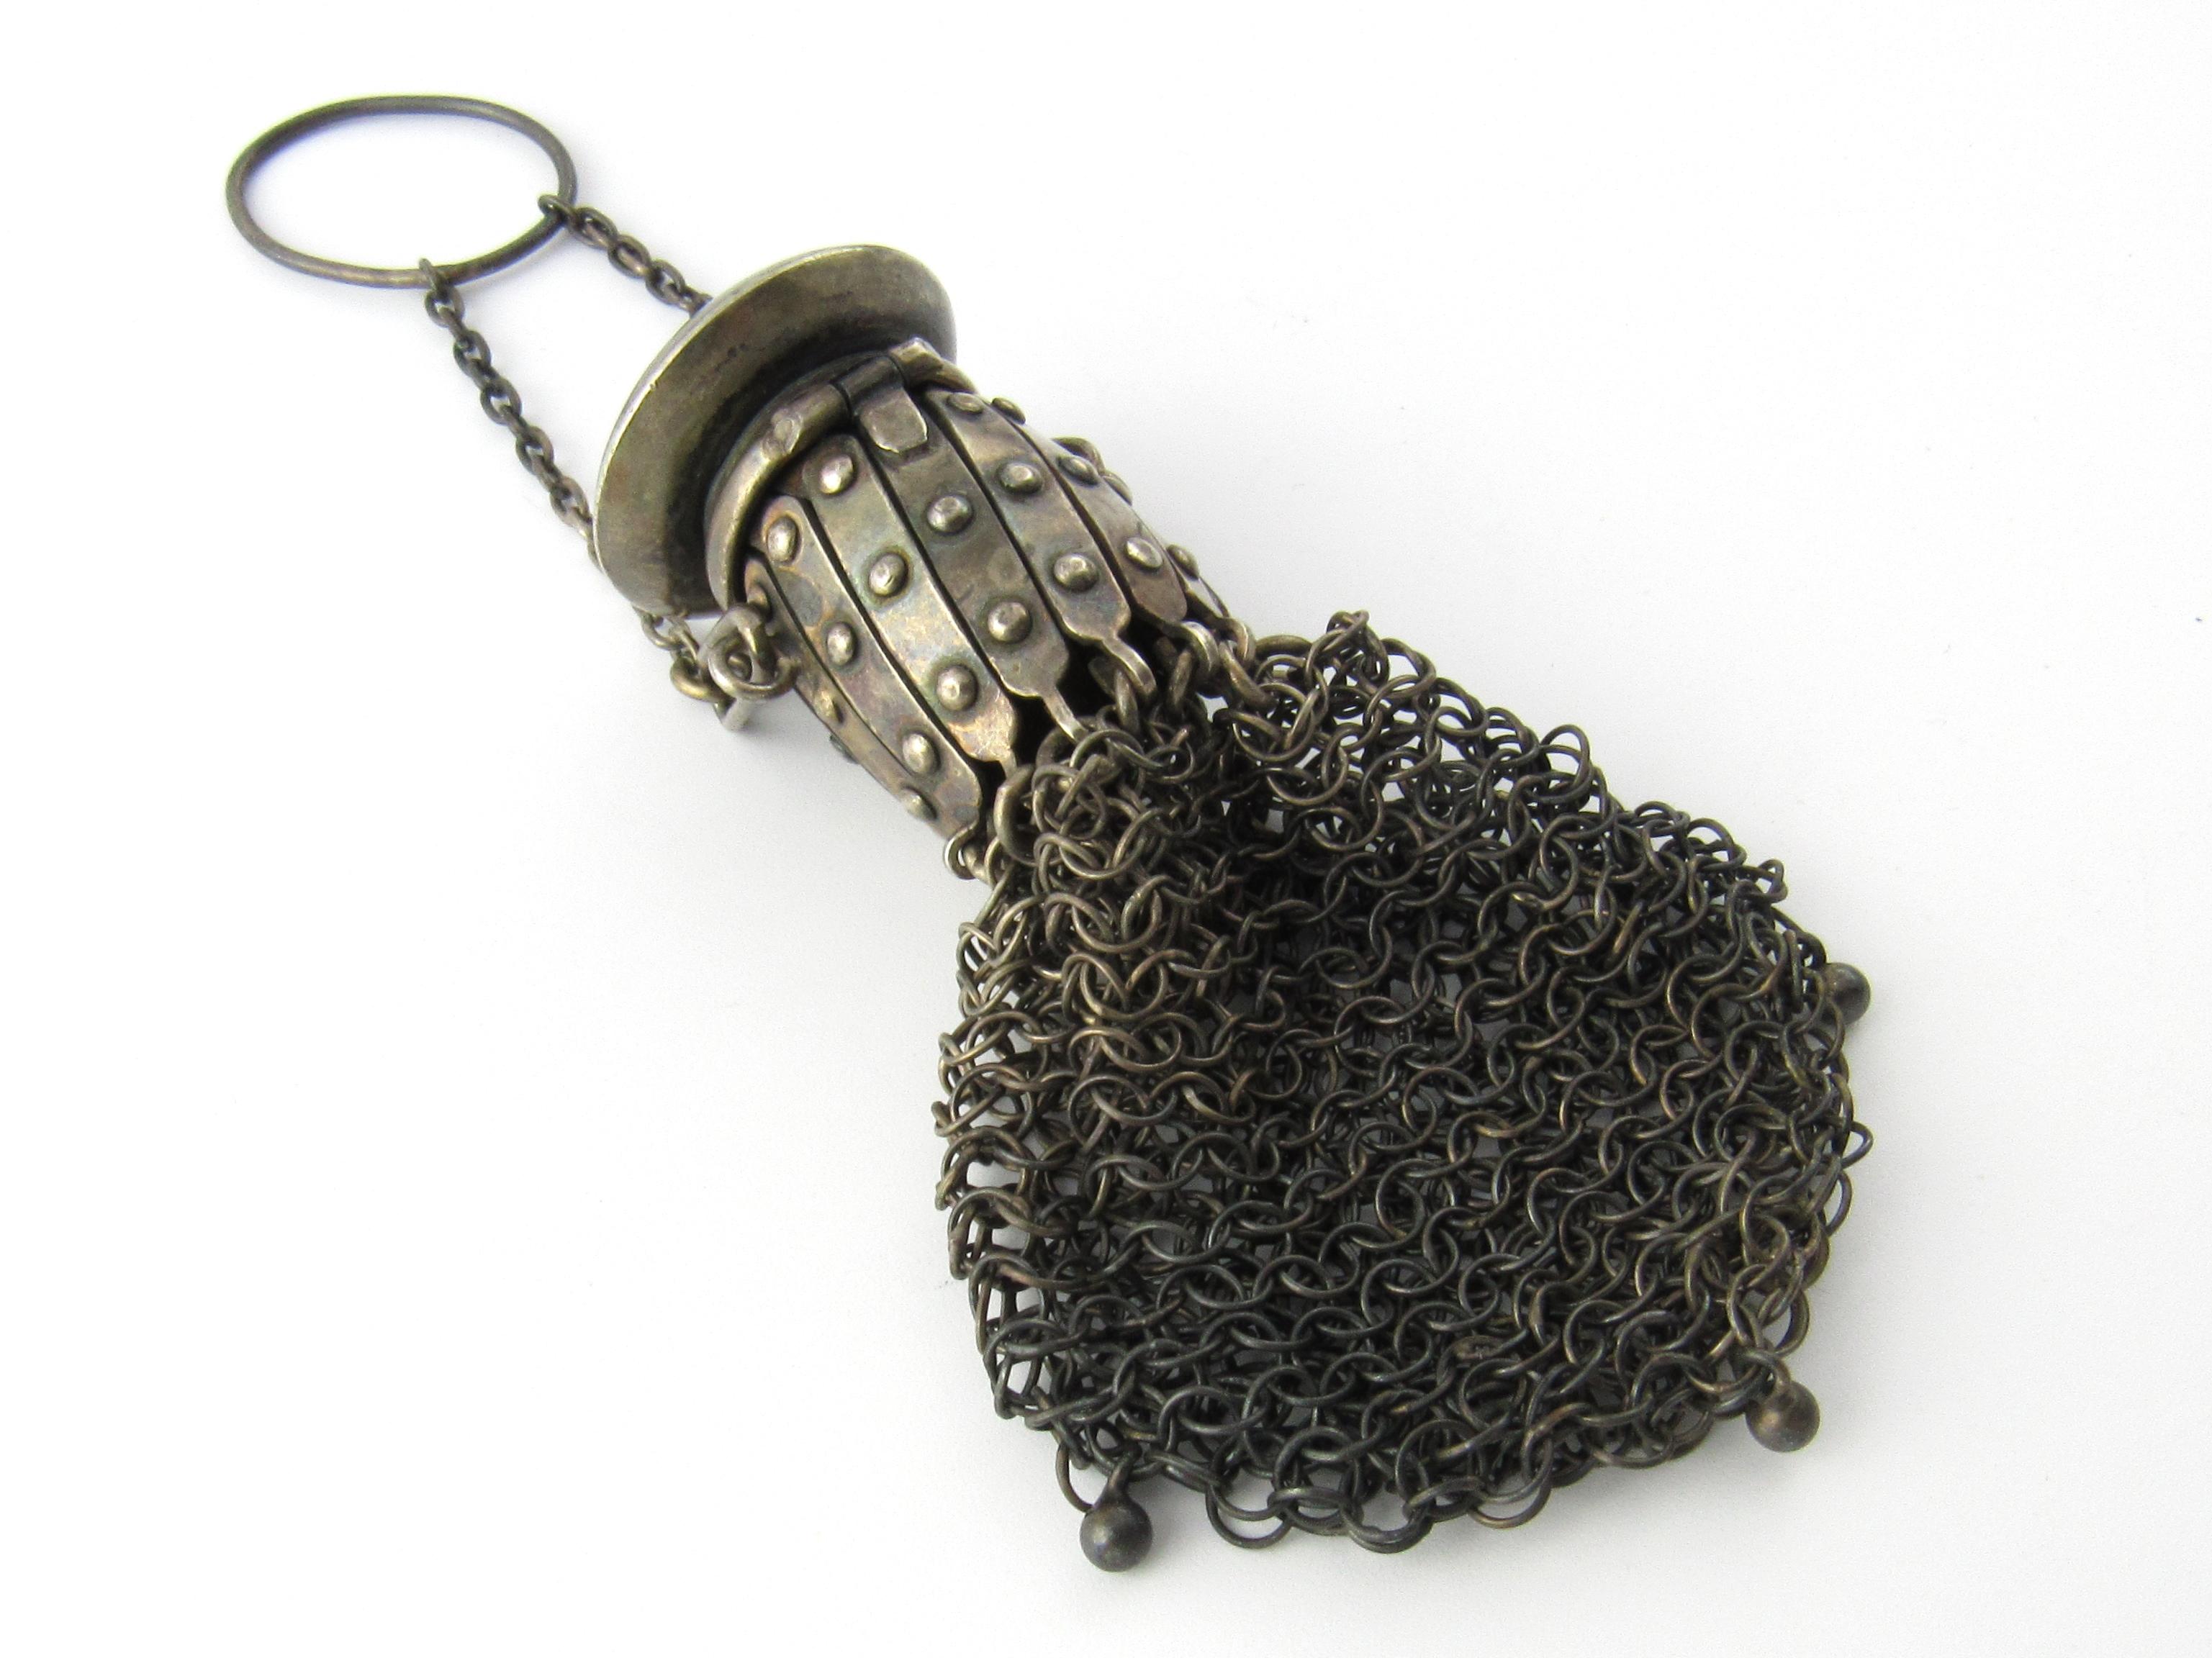 Antique Sterling Silver Mesh Accordion Coin Purse Monogram

This is a beautiful collectible mesh accordian coin purse with dangling beads on the bottom.

Measurement: Purse measures 3 and 1/2 inches in length, with handle measures 6 inches in